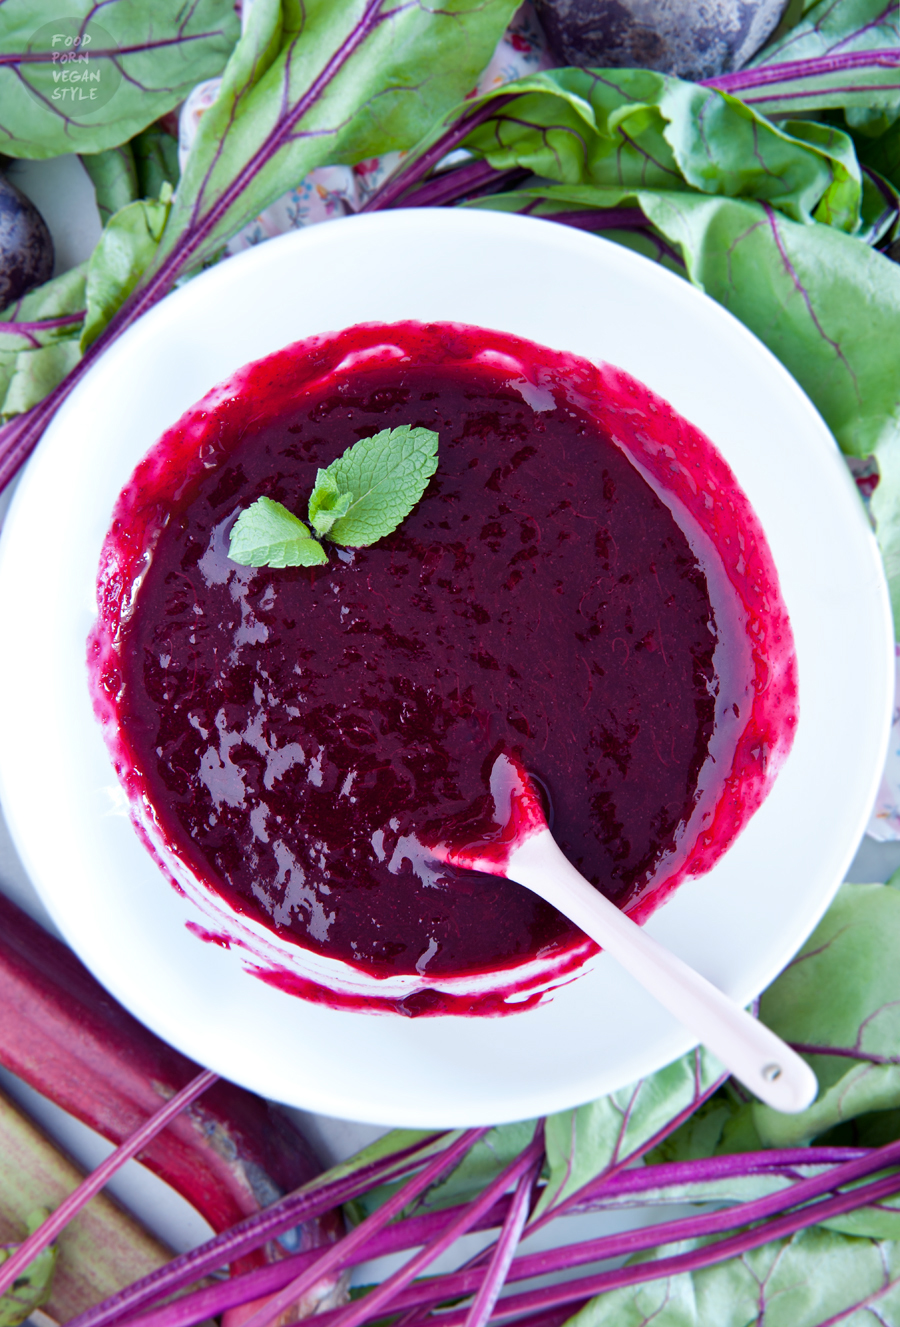 Beetroot-rhubarb 'jelly' pudding